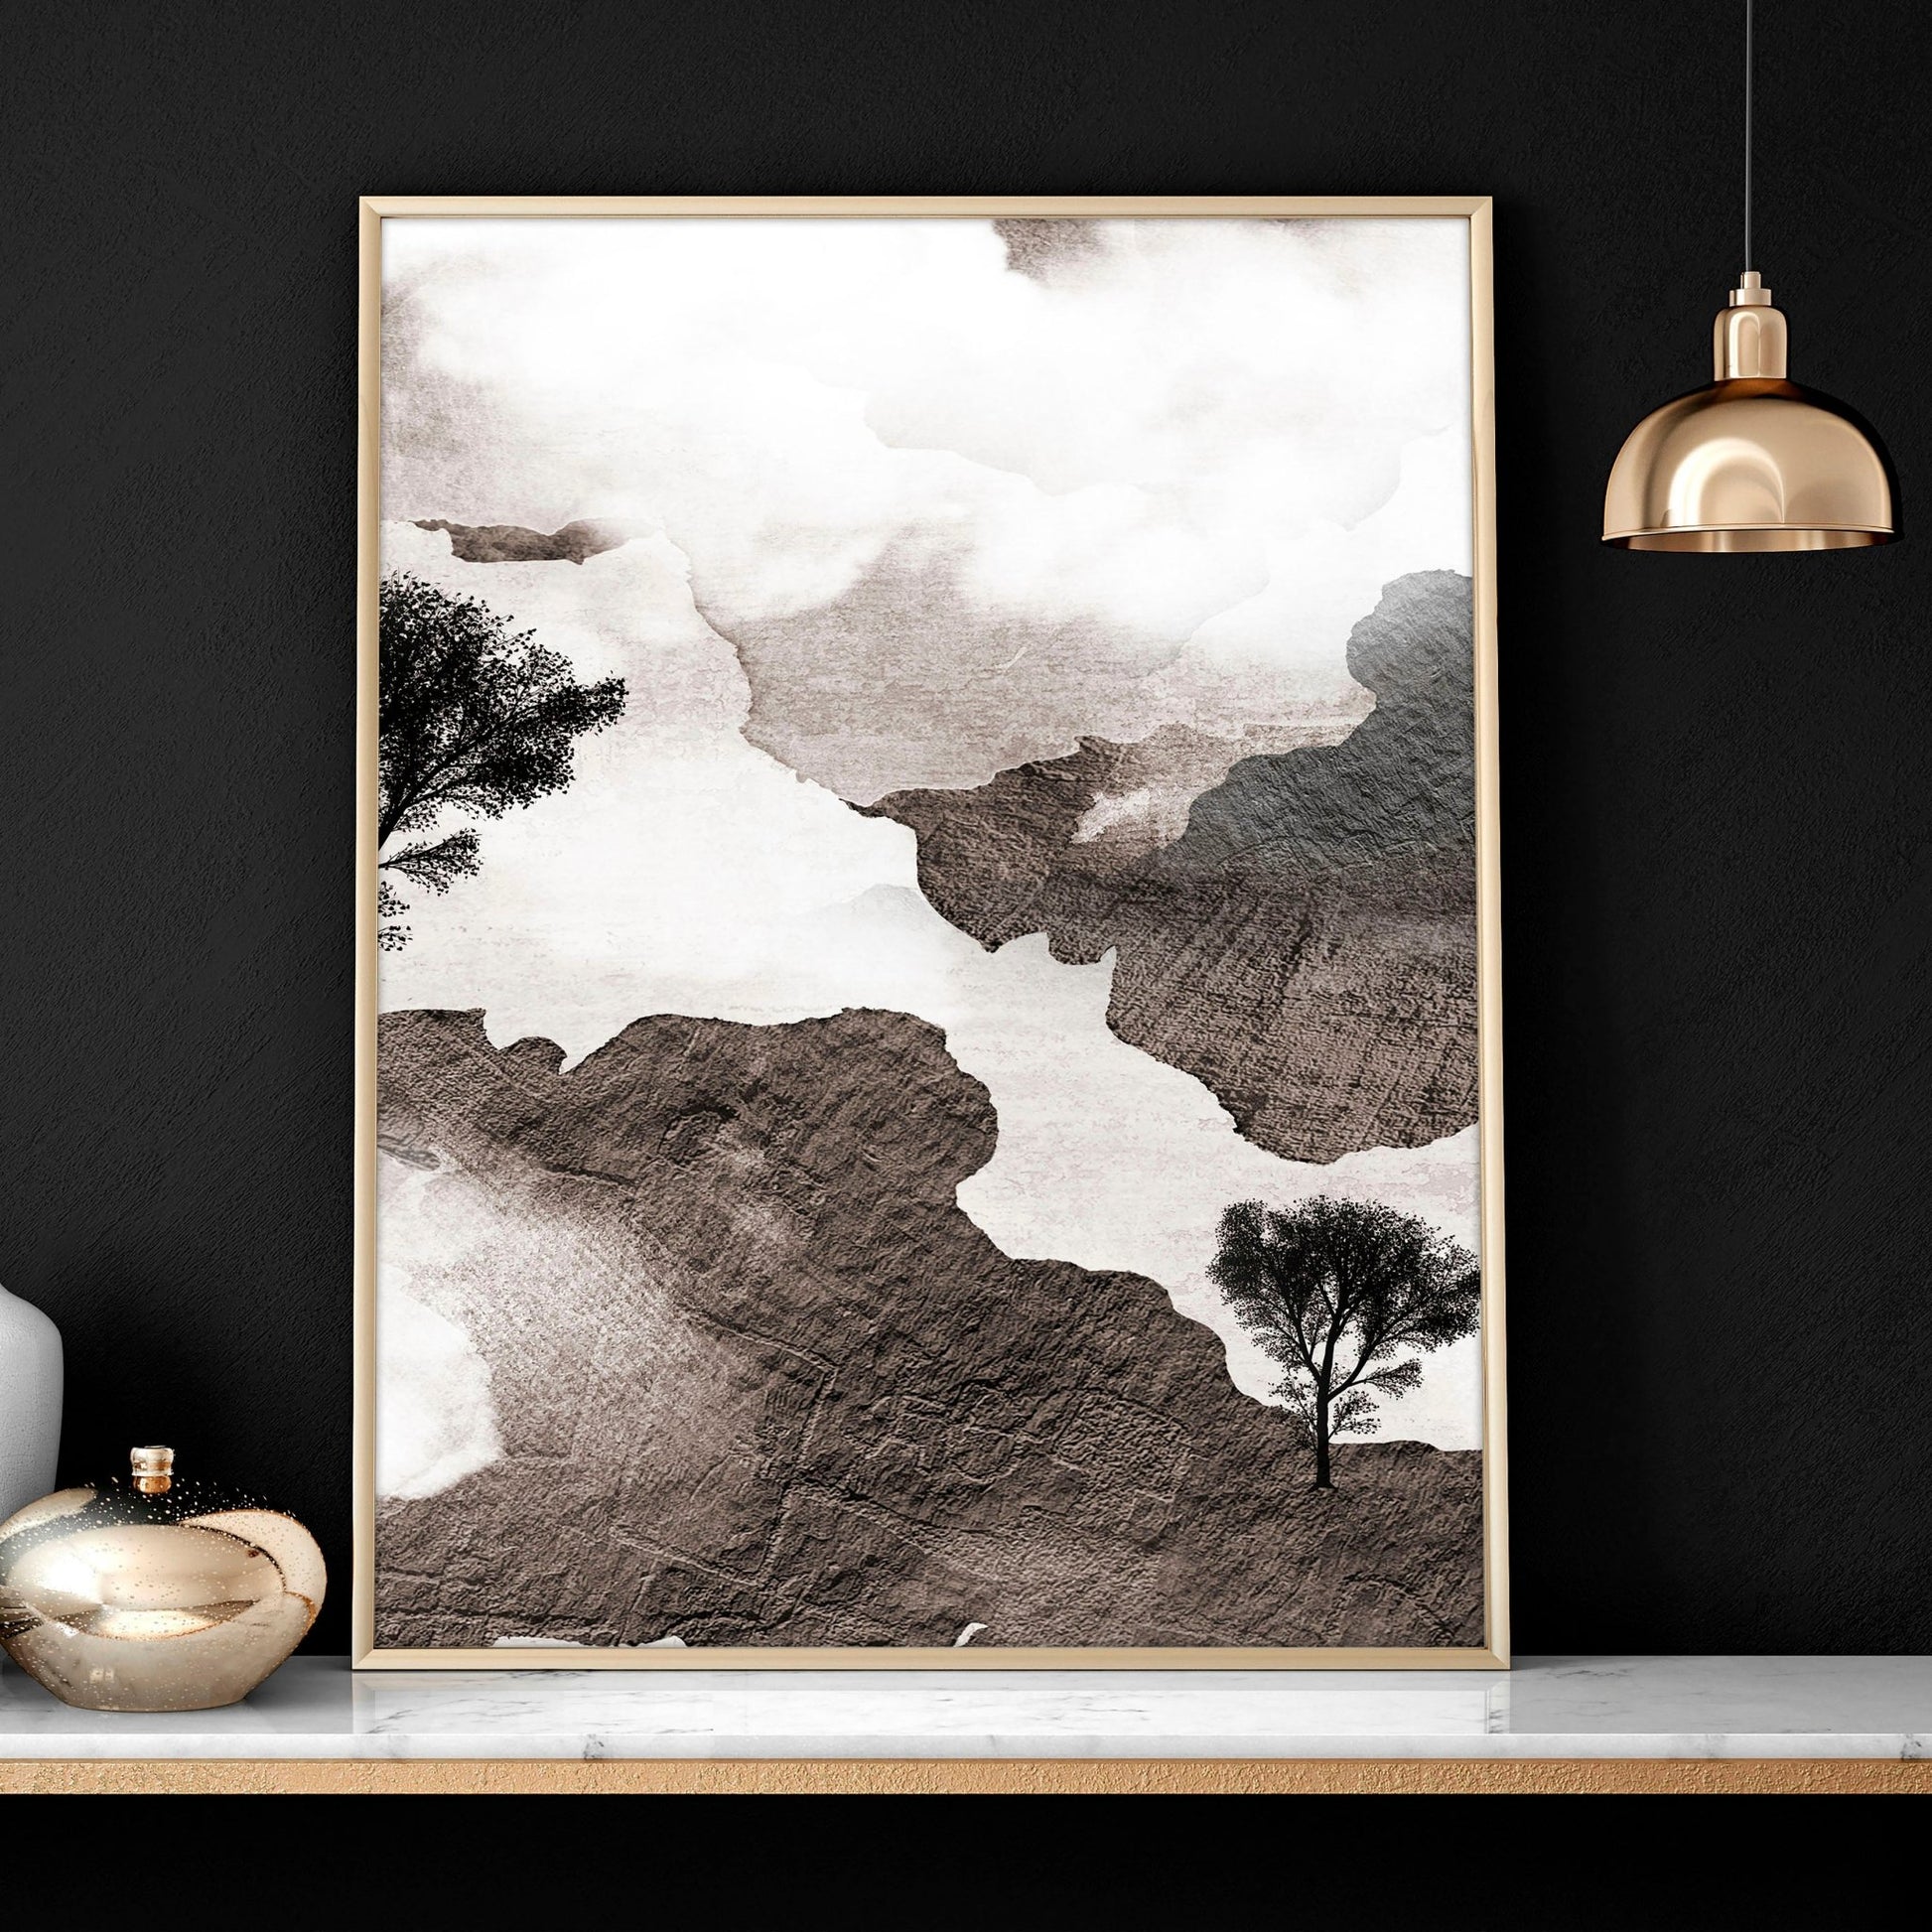 Earth toned living room pictures for the walls | set of 3 art prints - About Wall Art